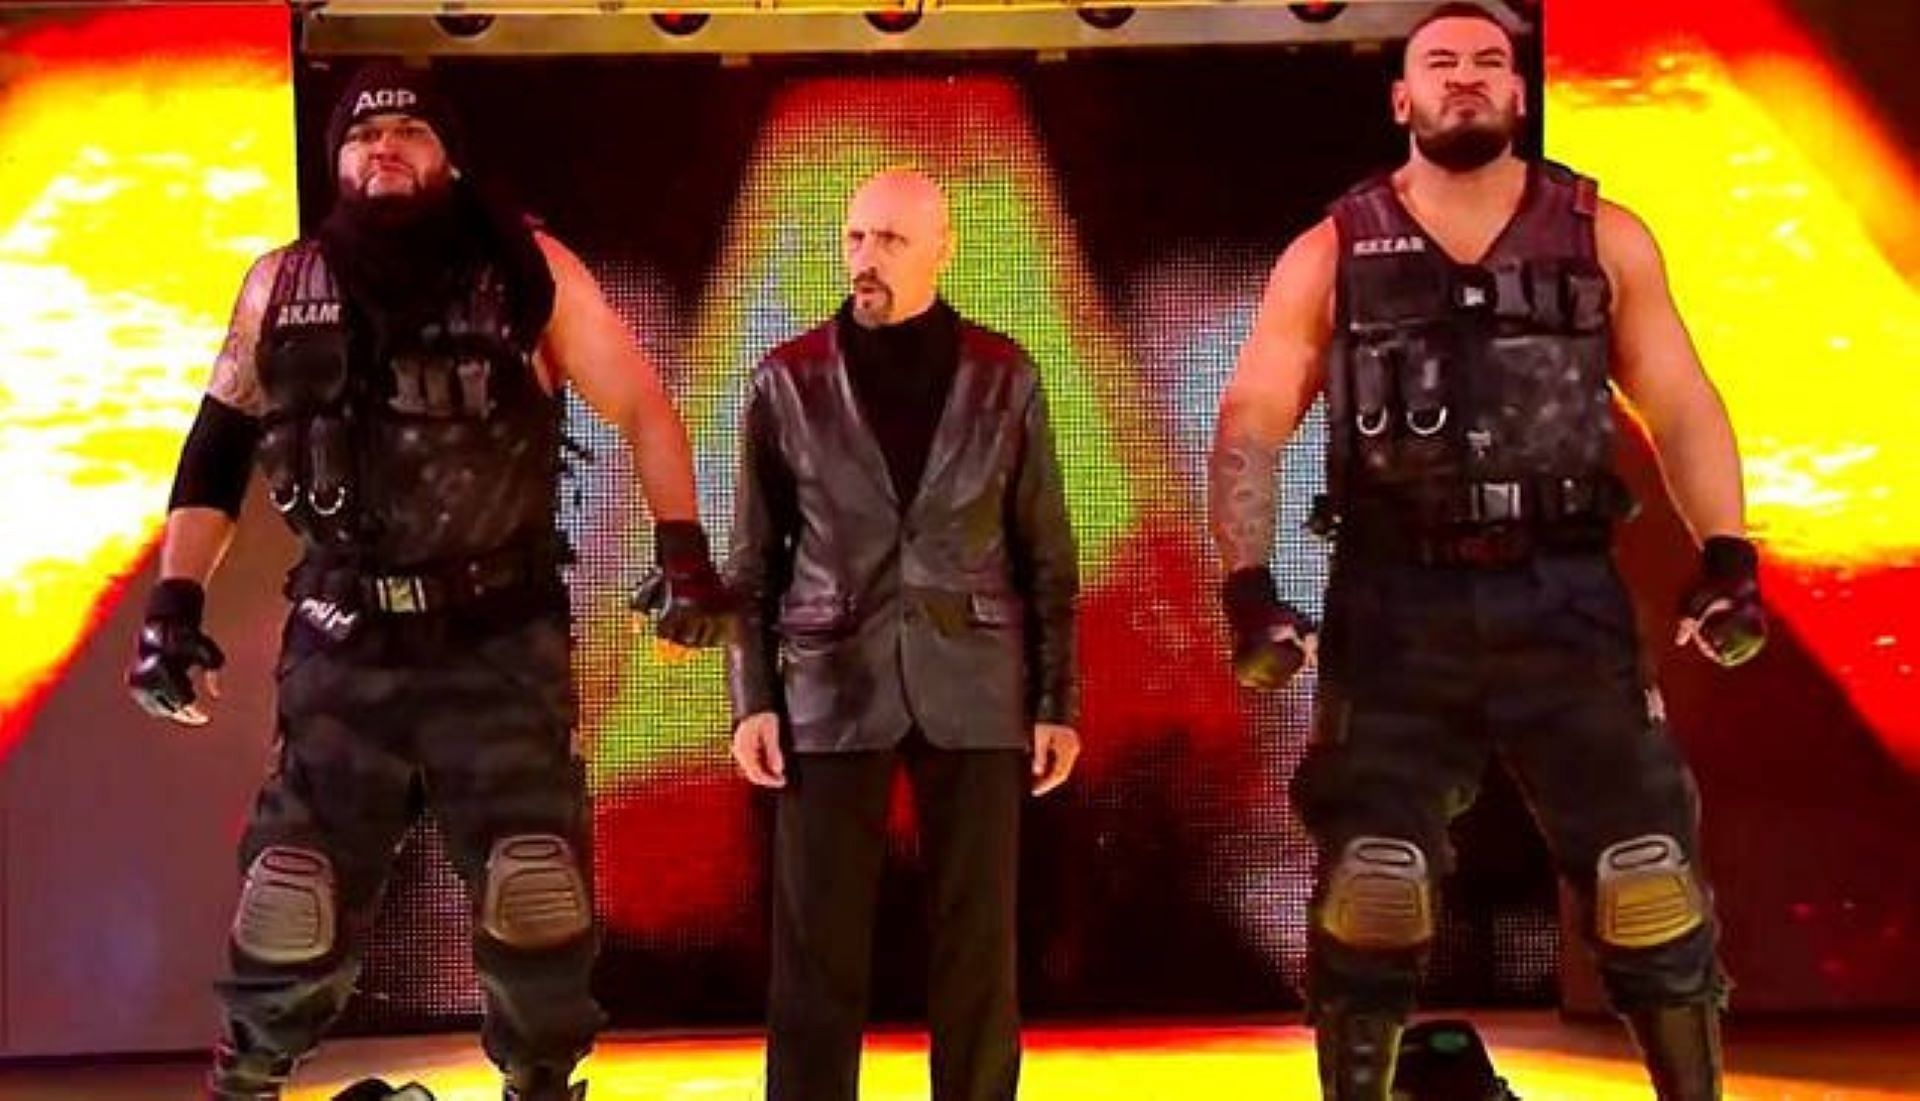 The Authors of Pain will reunite with Paul Ellering on June 4 in Nottingham, UK